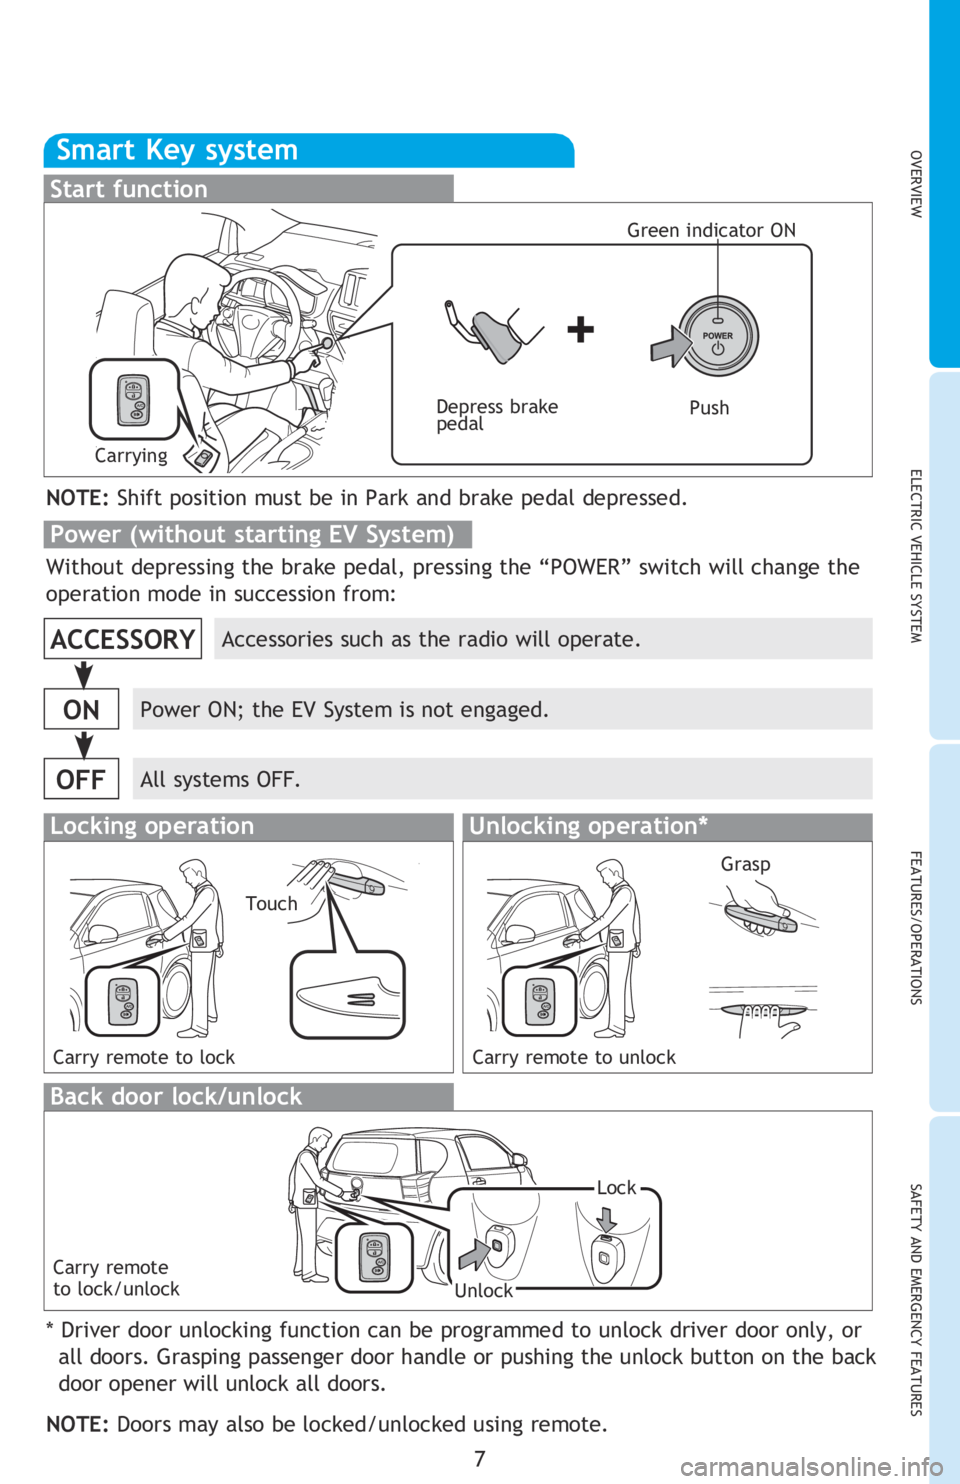 TOYOTA iQ EV 2013  Owners Manual (in English) OVERVIEWELECTRIC VEHICLE SYSTEM FEATURES/OPERATIONS
SAFETY AND EMERGENCY FEATURES
7
Unlocking operation
NOTE: If a door is not opened within 
60 seconds of unlocking, all doors will 
relock for safety